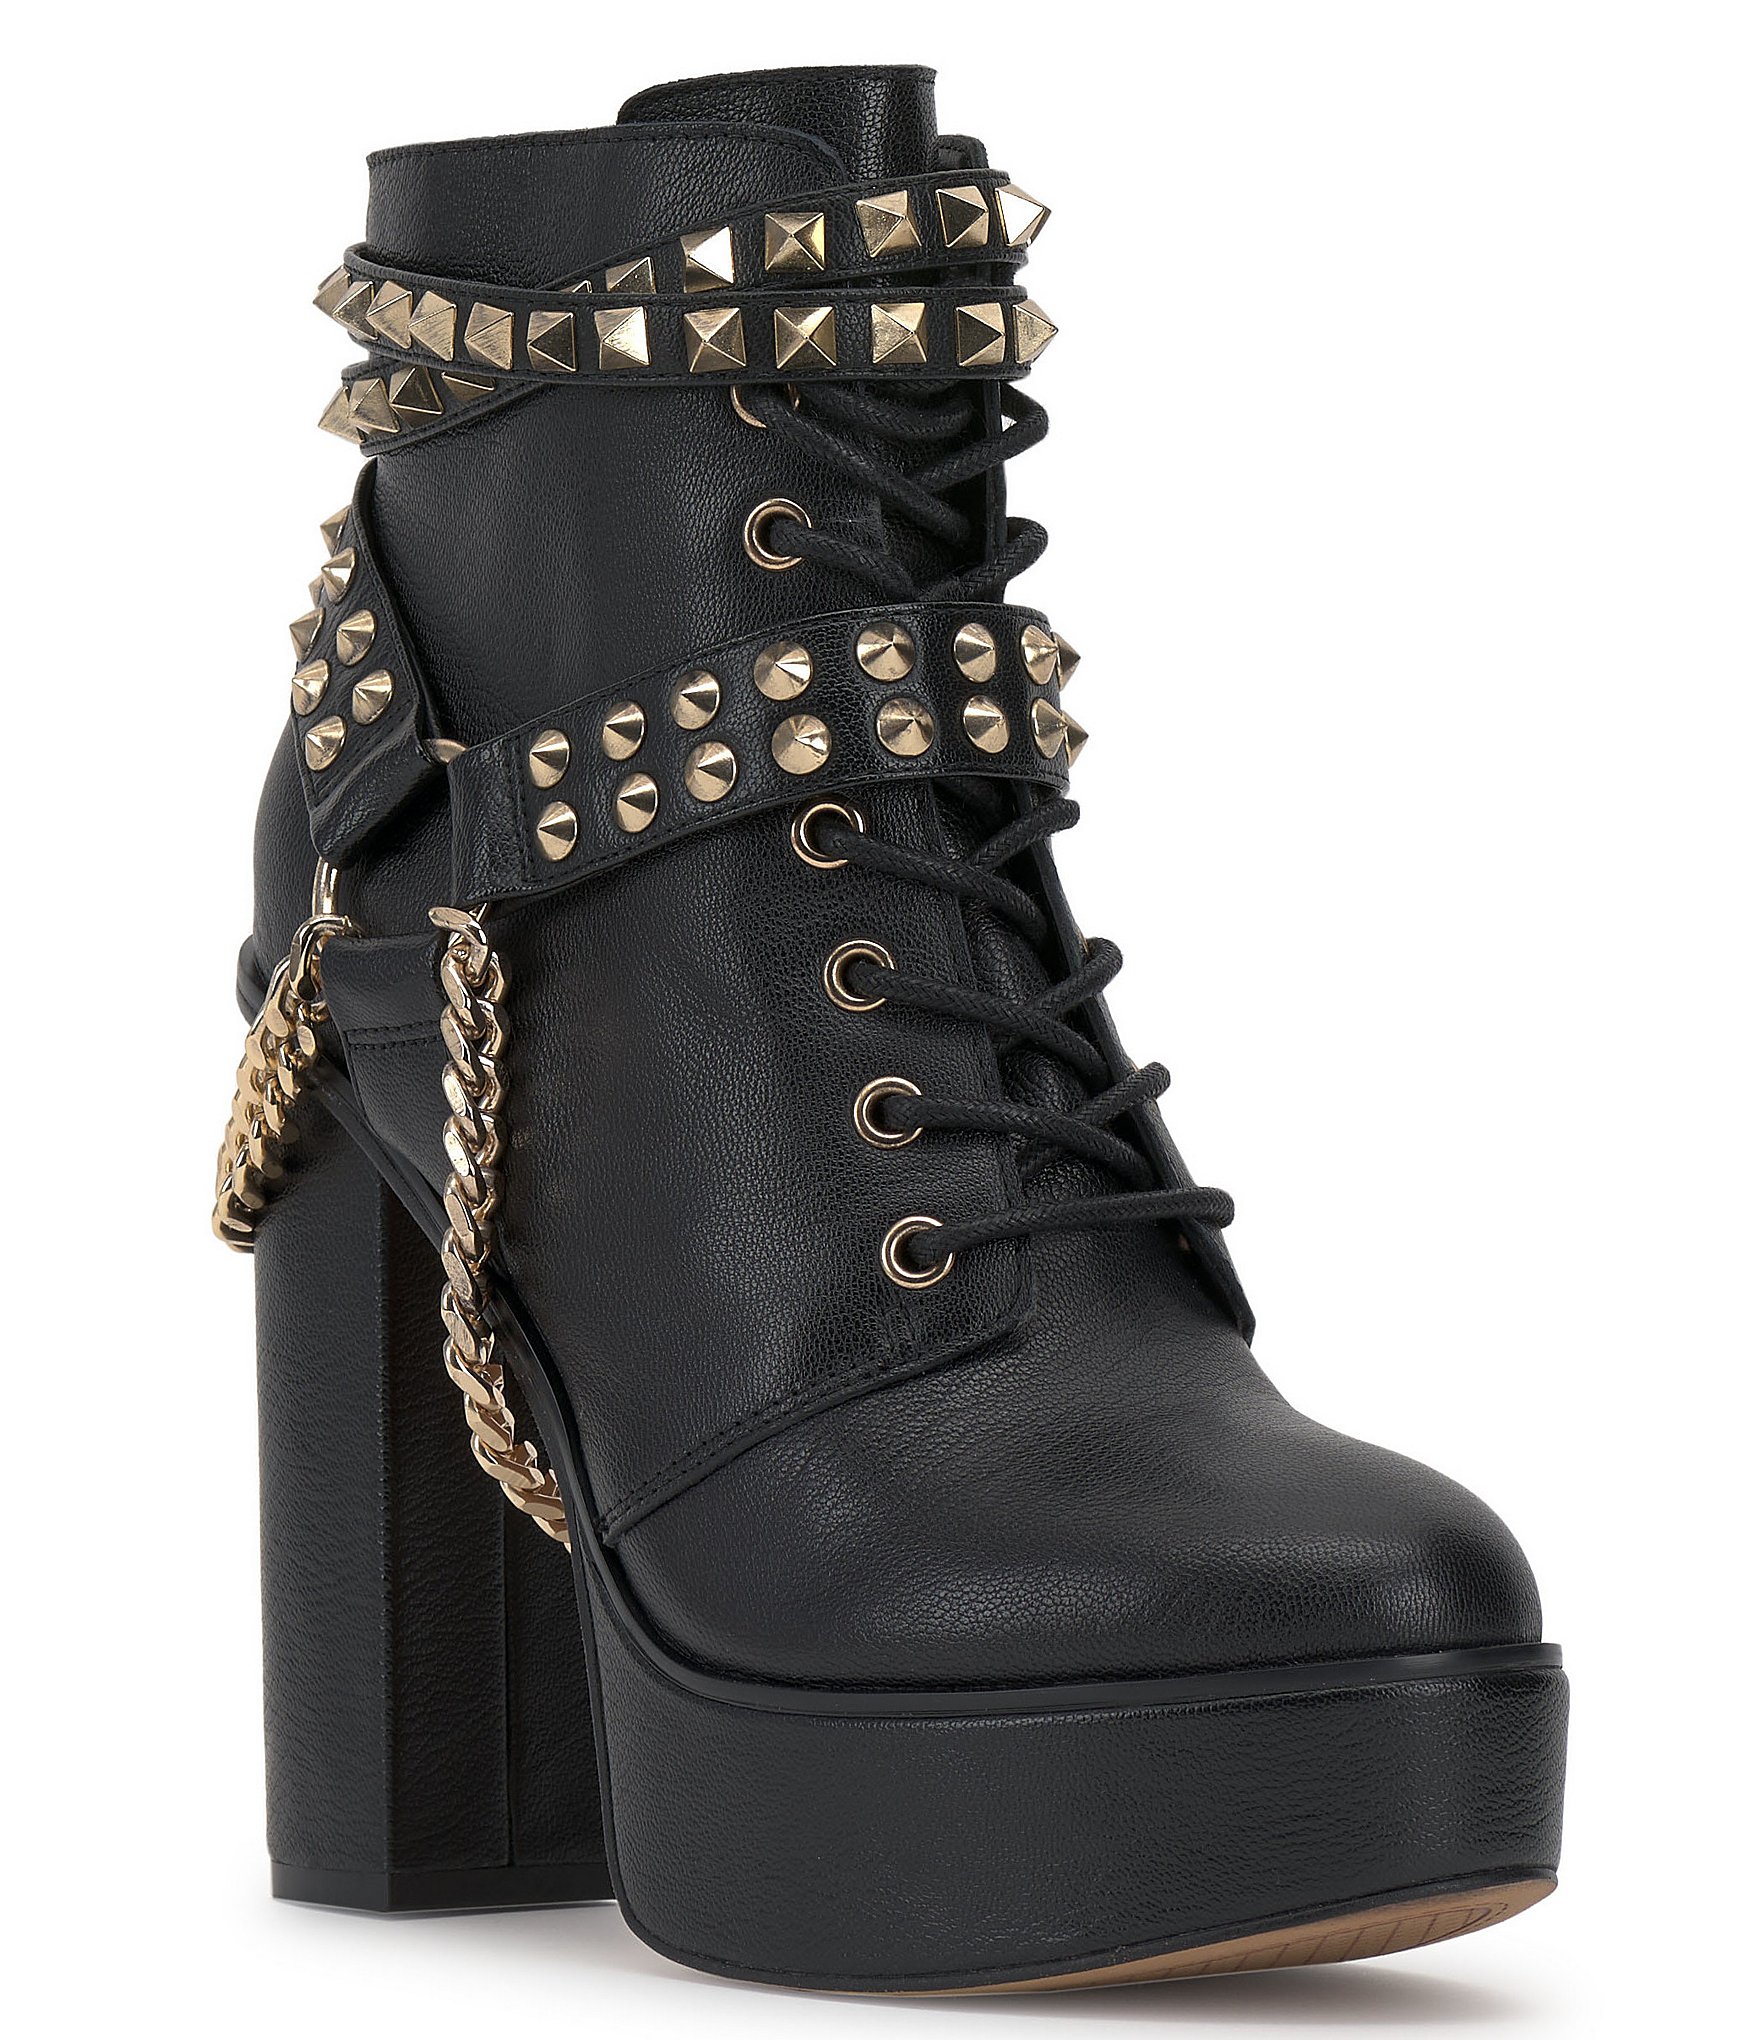 studded shoes: Boots & Booties